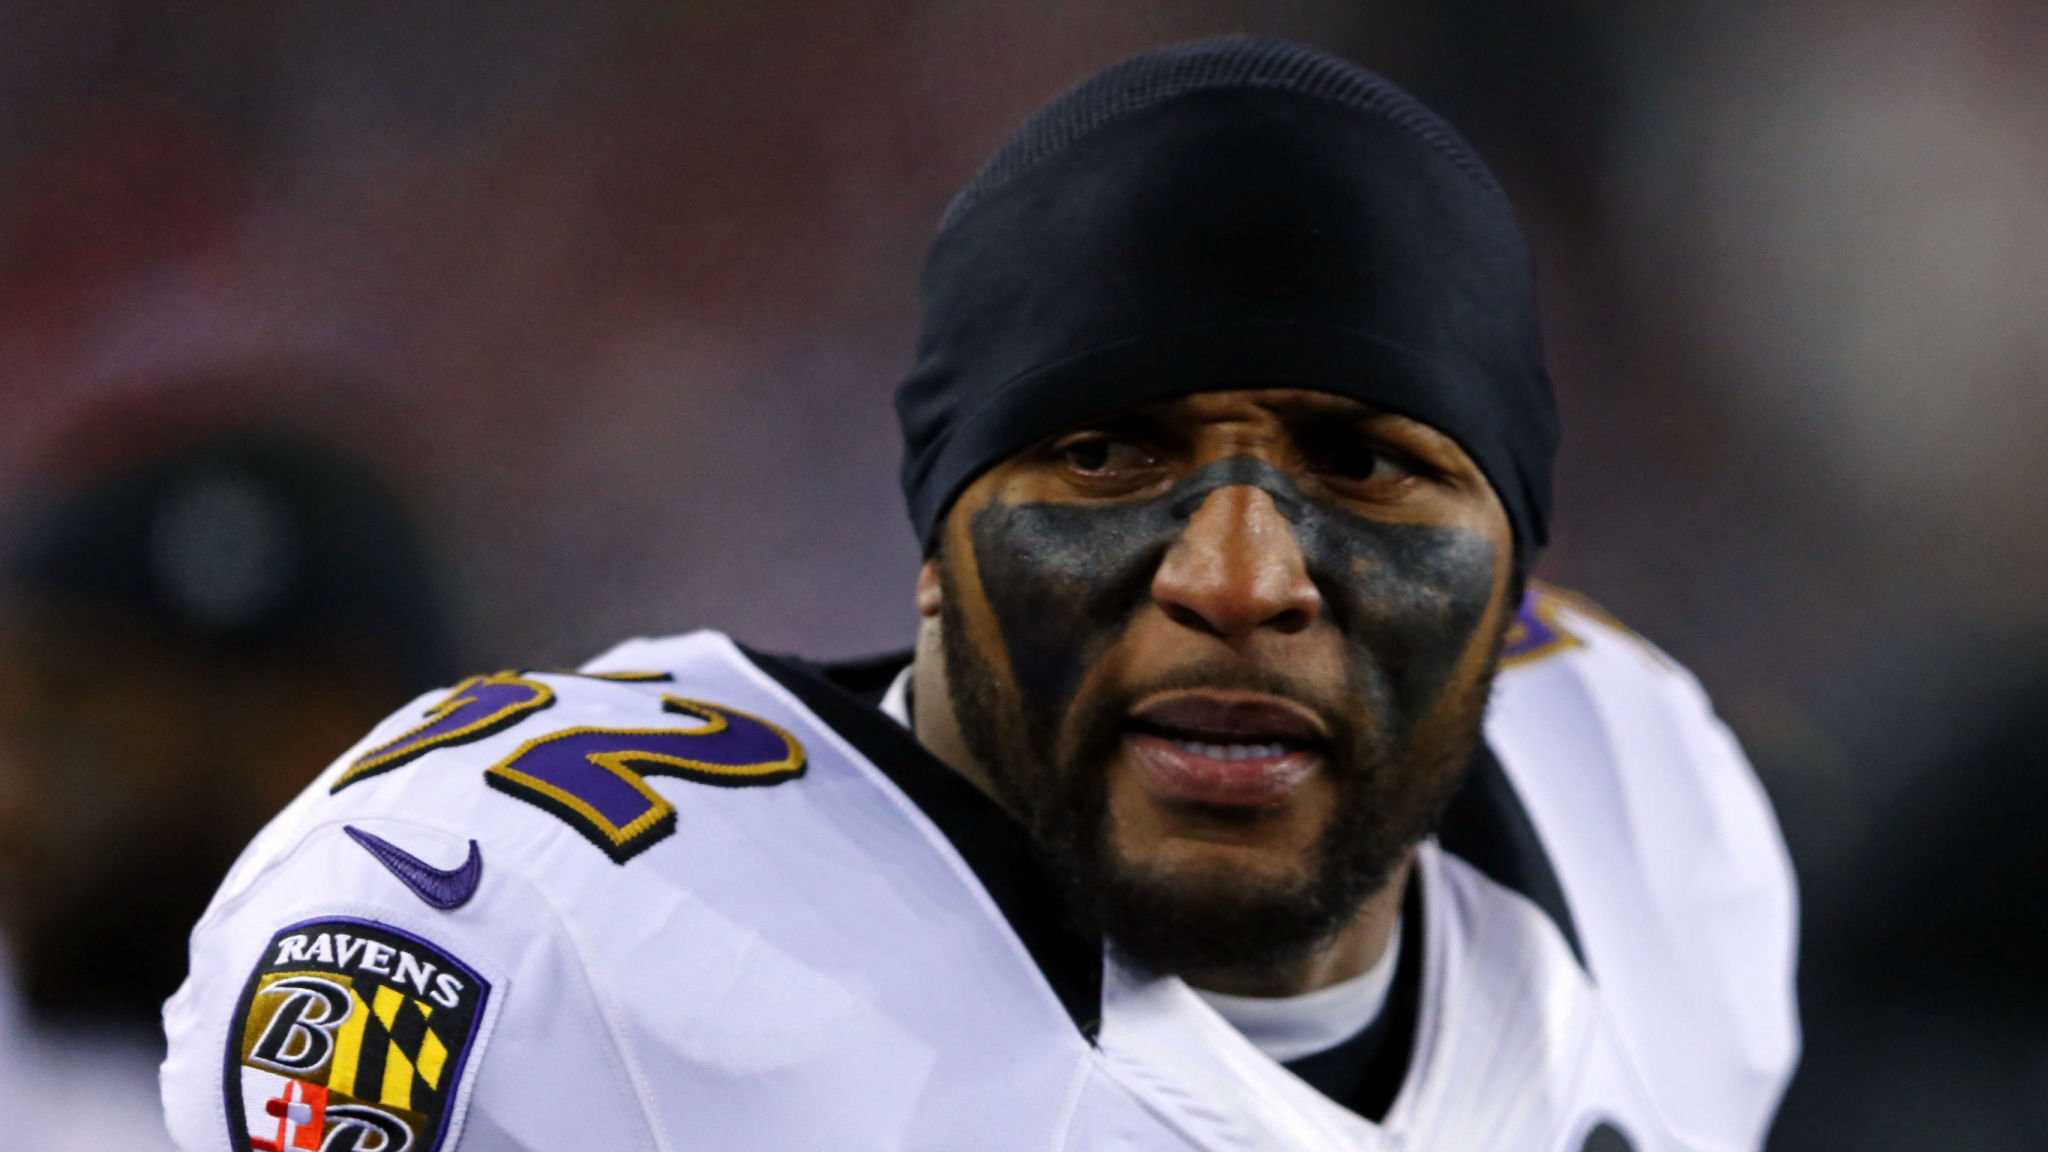 Ray Lewis Won Two Super Bowls With The Baltimore Ravens - Intimidating Football Face Paint - HD Wallpaper 